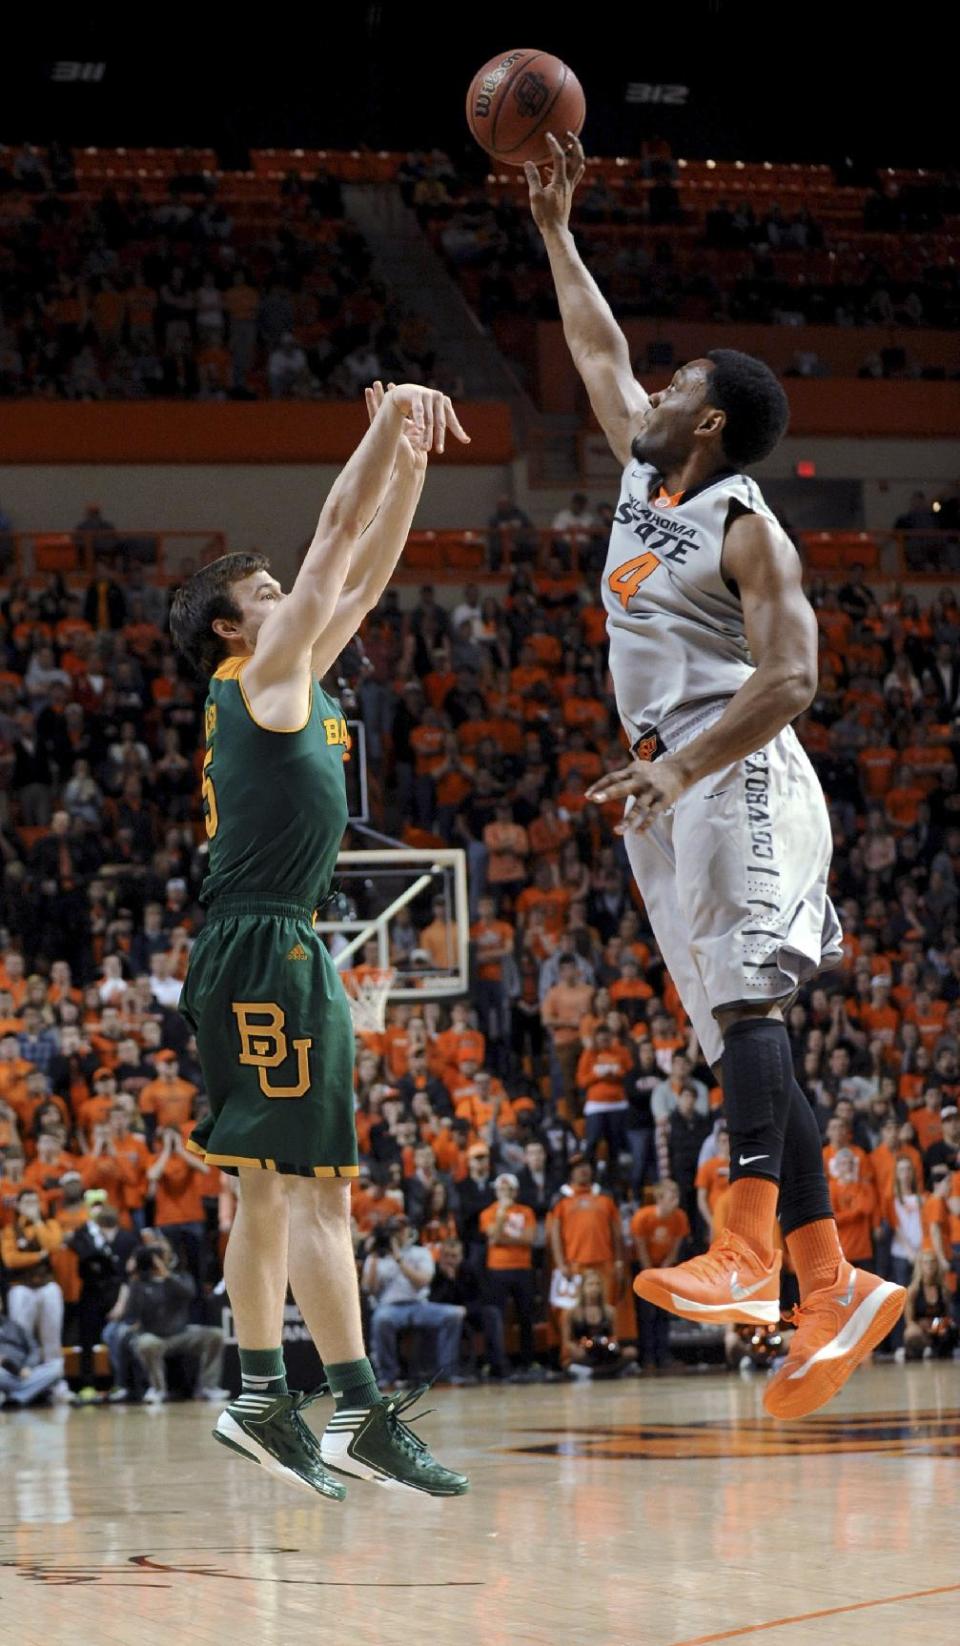 Oklahoma State forward Brian Williams, right, blocks the shot of Baylor guard Brady Heslip during the first half of an NCAA college basketball game in Stillwater, Okla., Saturday, Feb. 1, 2014. Baylor won 76-70. (AP Photo/Brody Schmidt)